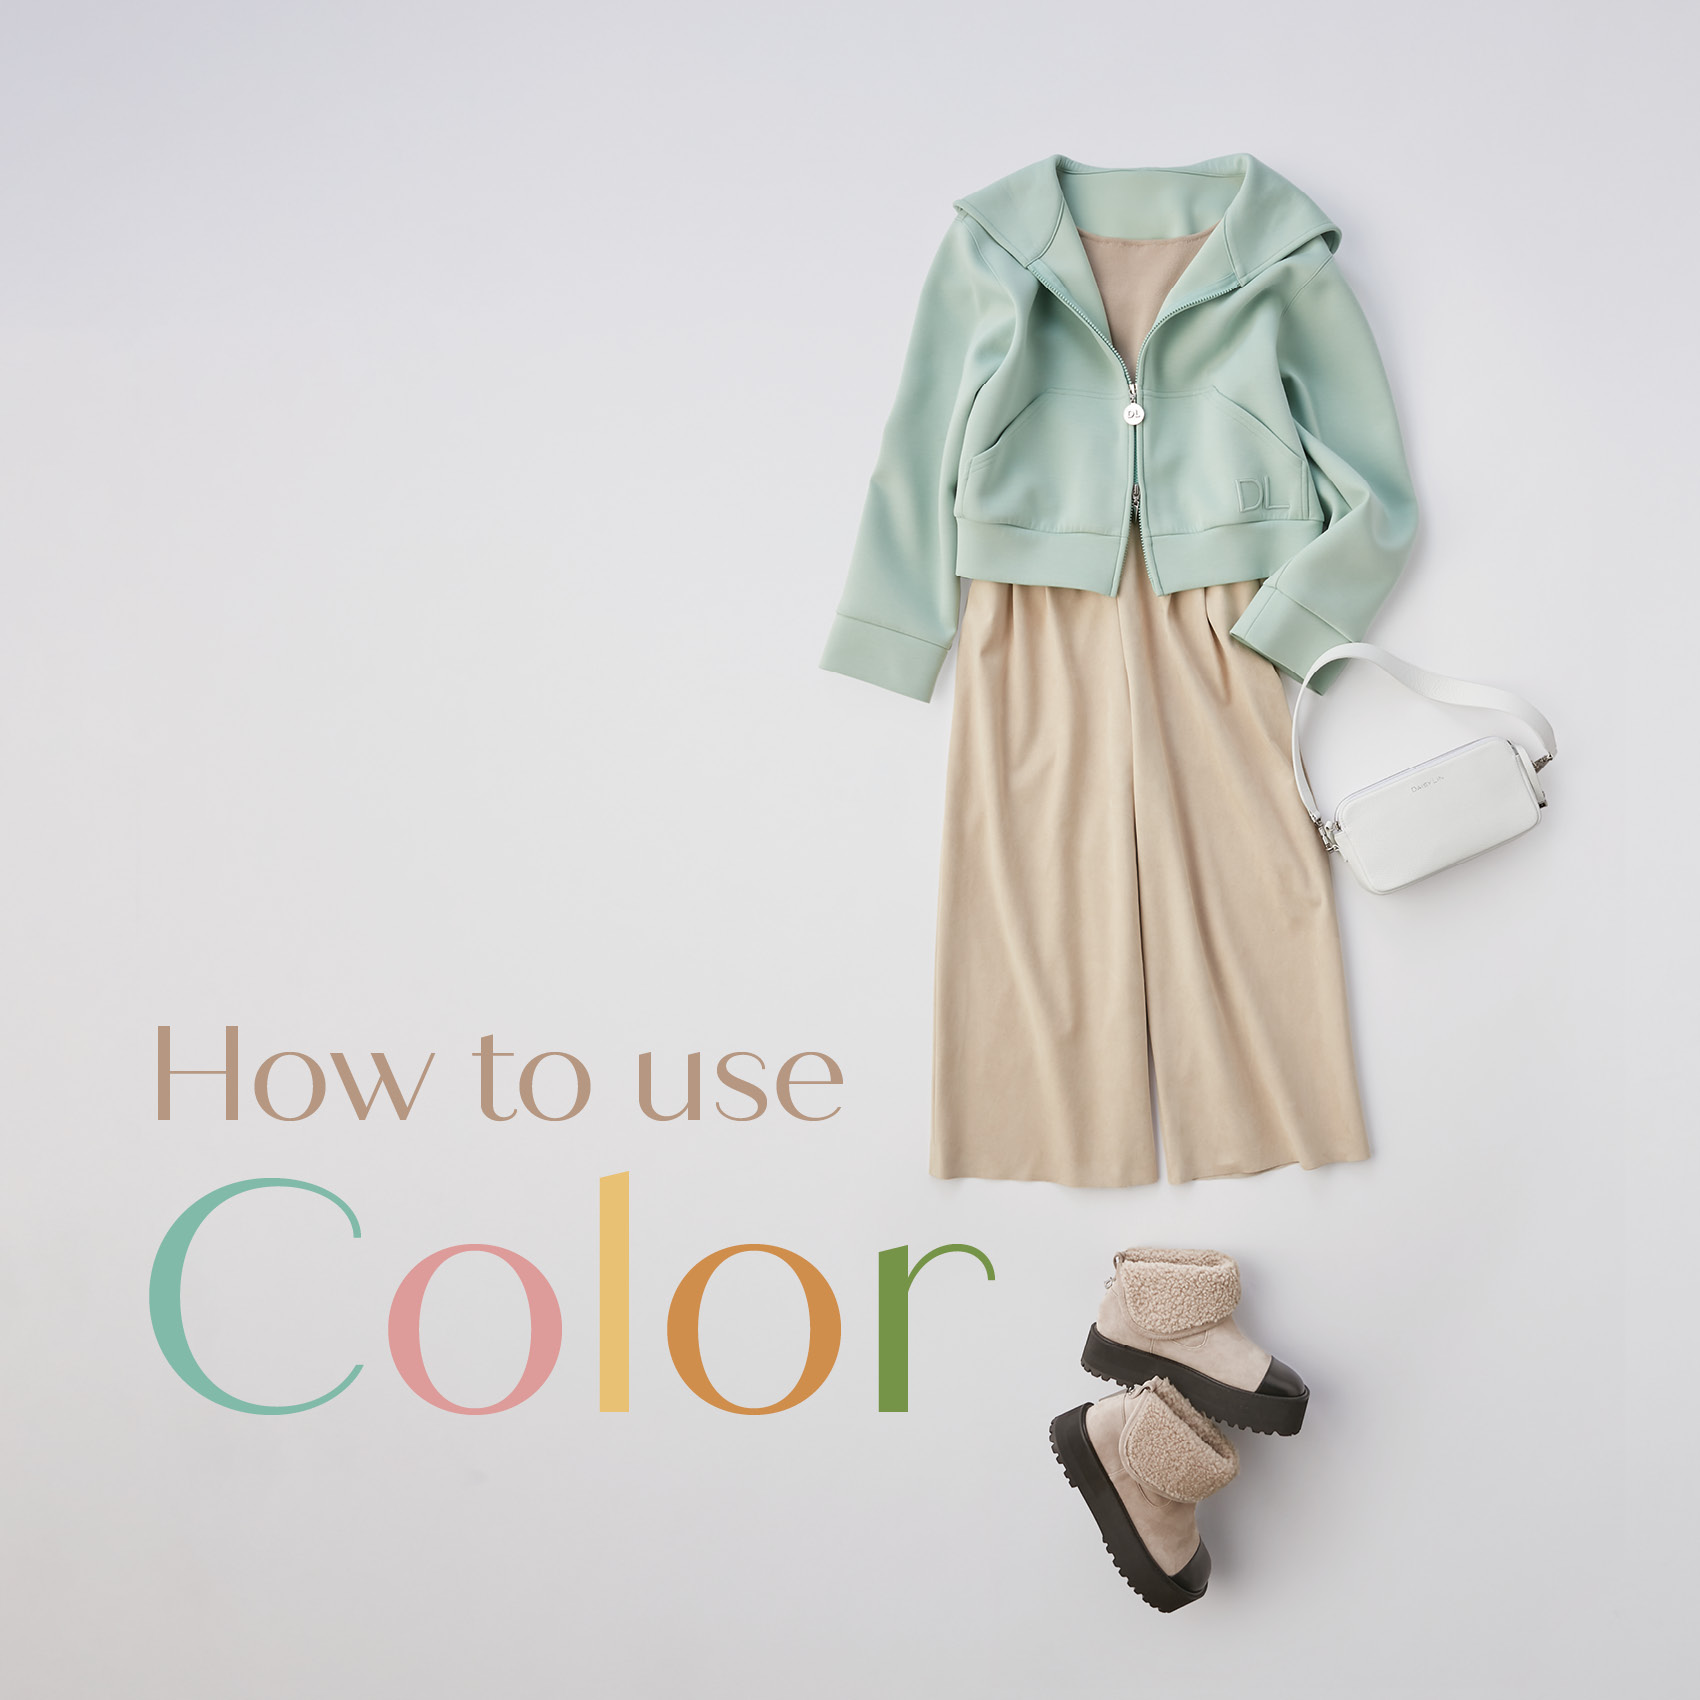 How to use Color